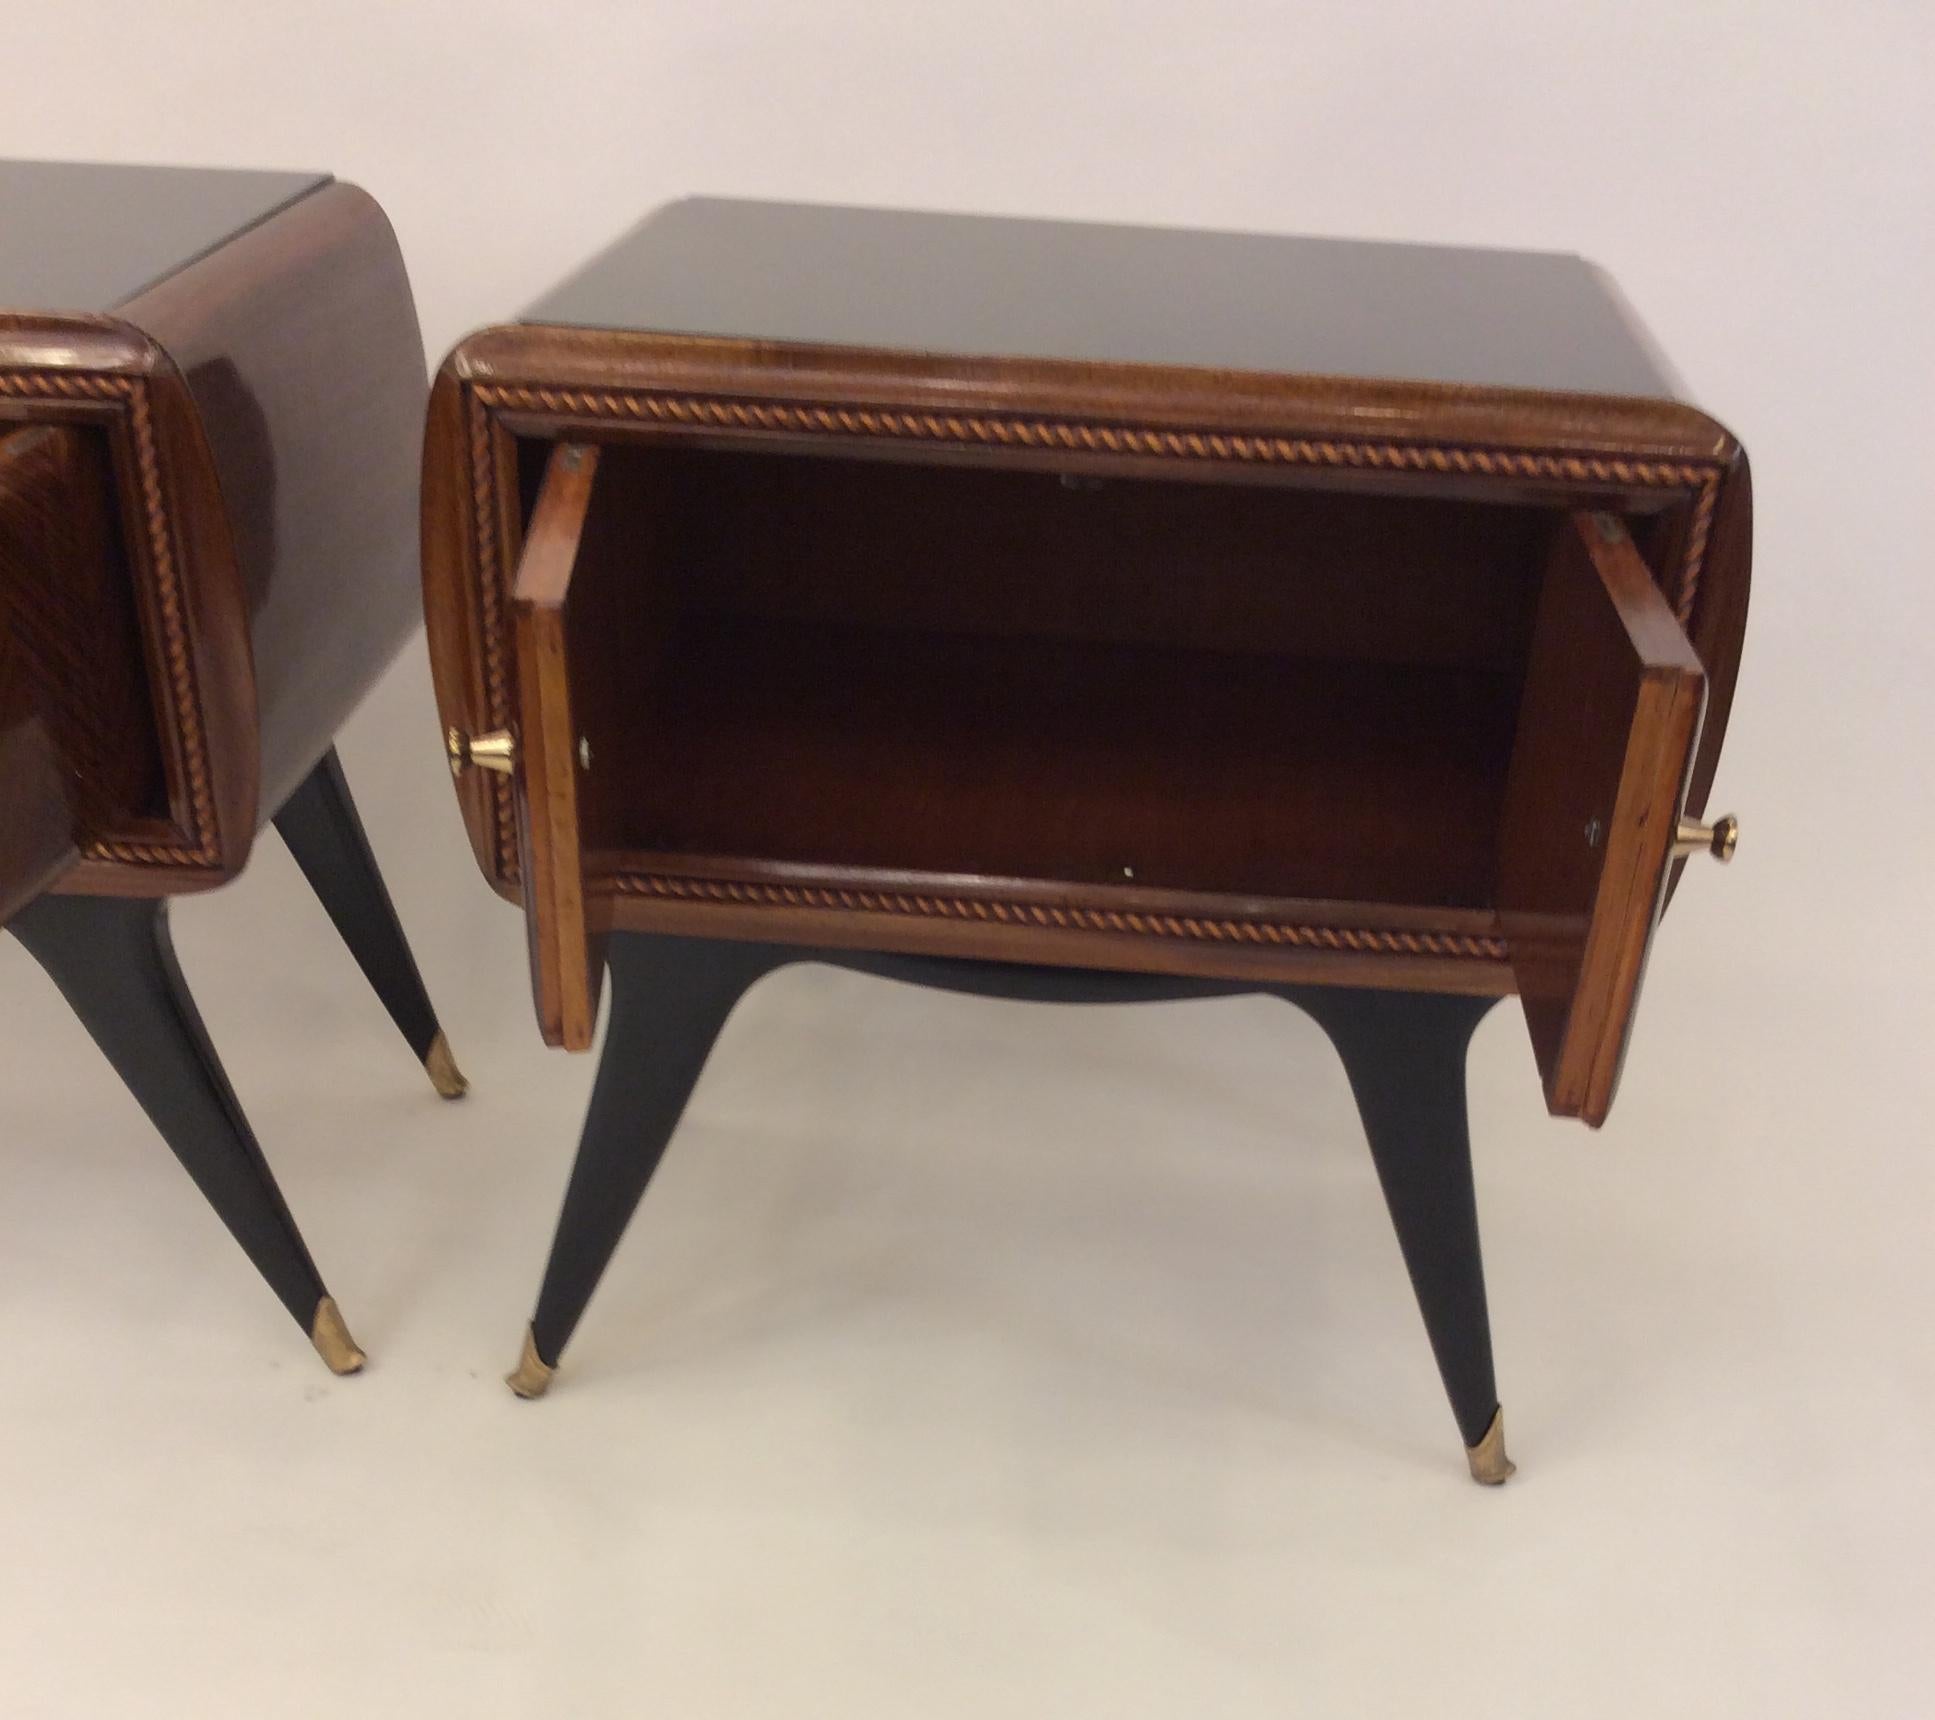 Pair of Italian Nightstands in the Style of Gio Ponti, circa 1950 For Sale 9